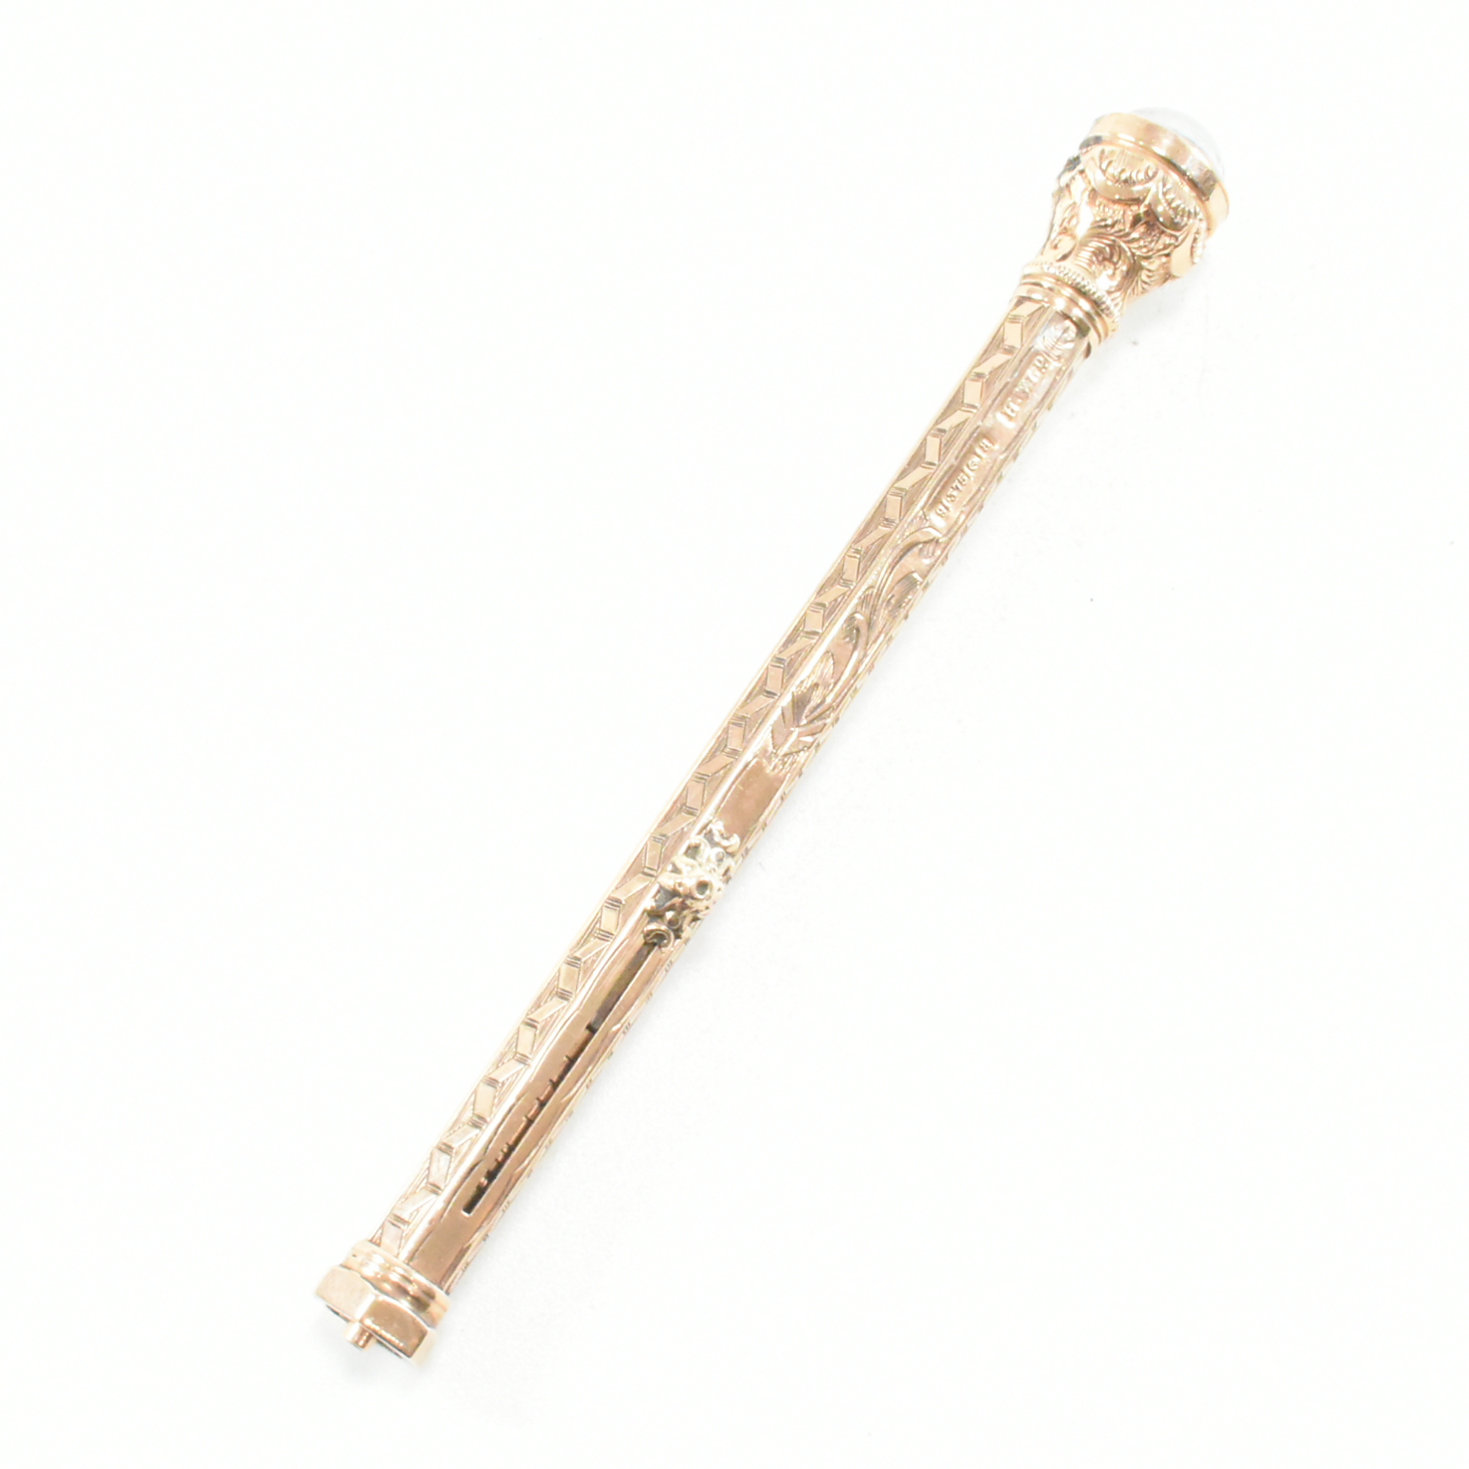 VICTORIAN HALLMARKED 9CT GOLD DUAL PROPELLING PENCIL - Image 8 of 9